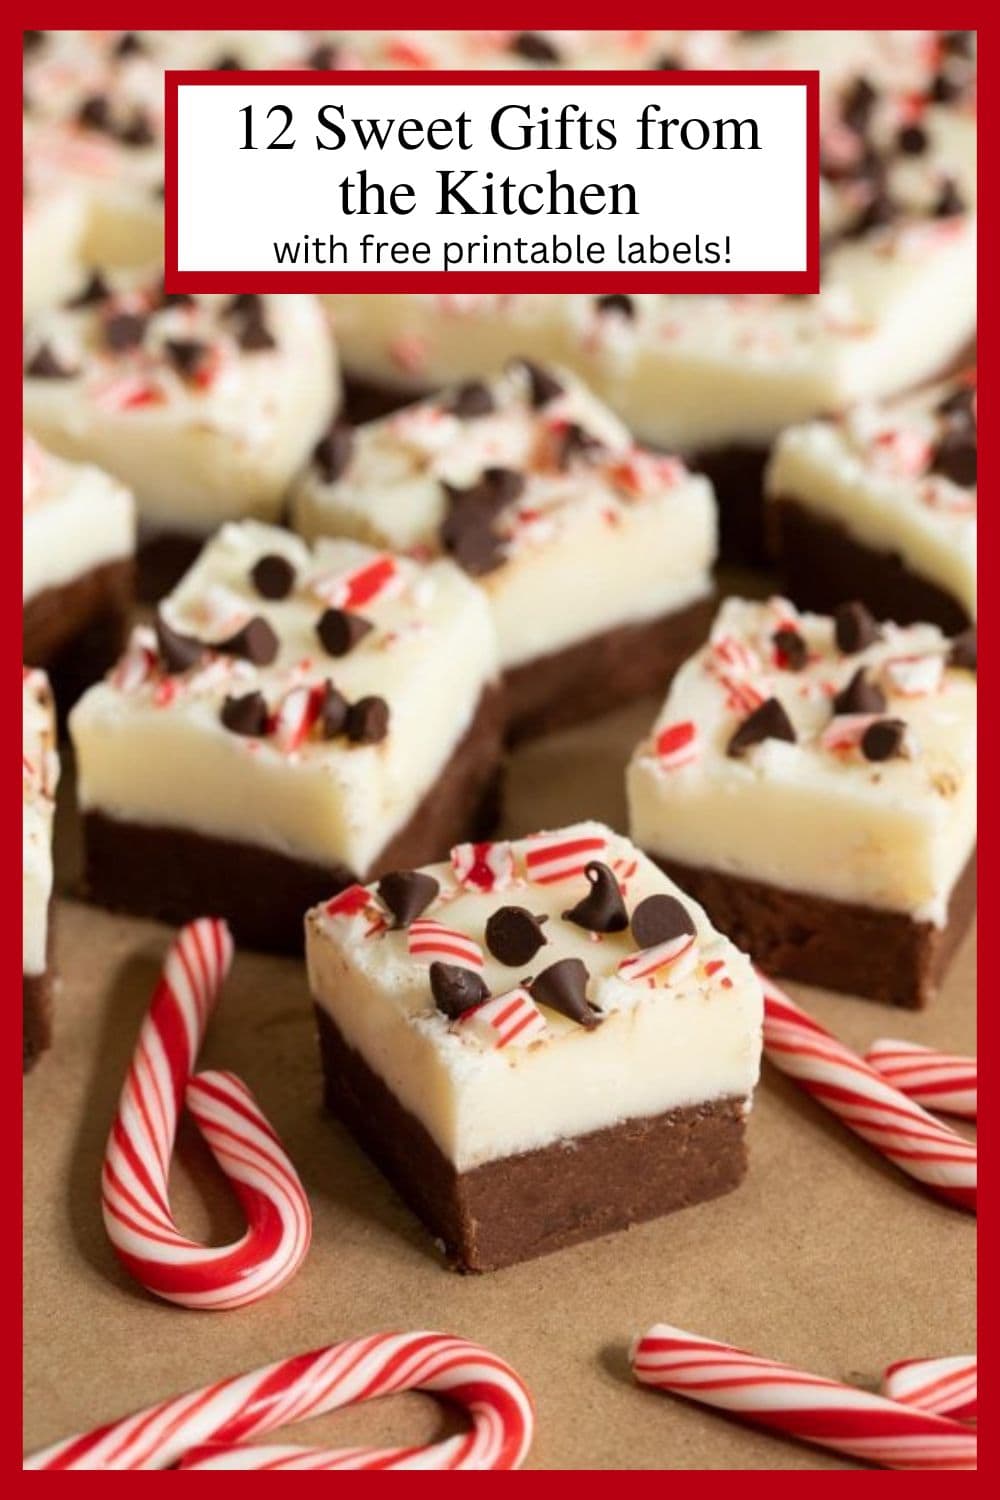 12 Sweet Holiday Gifts from the Kitchen (with free printable labels for gifts!)